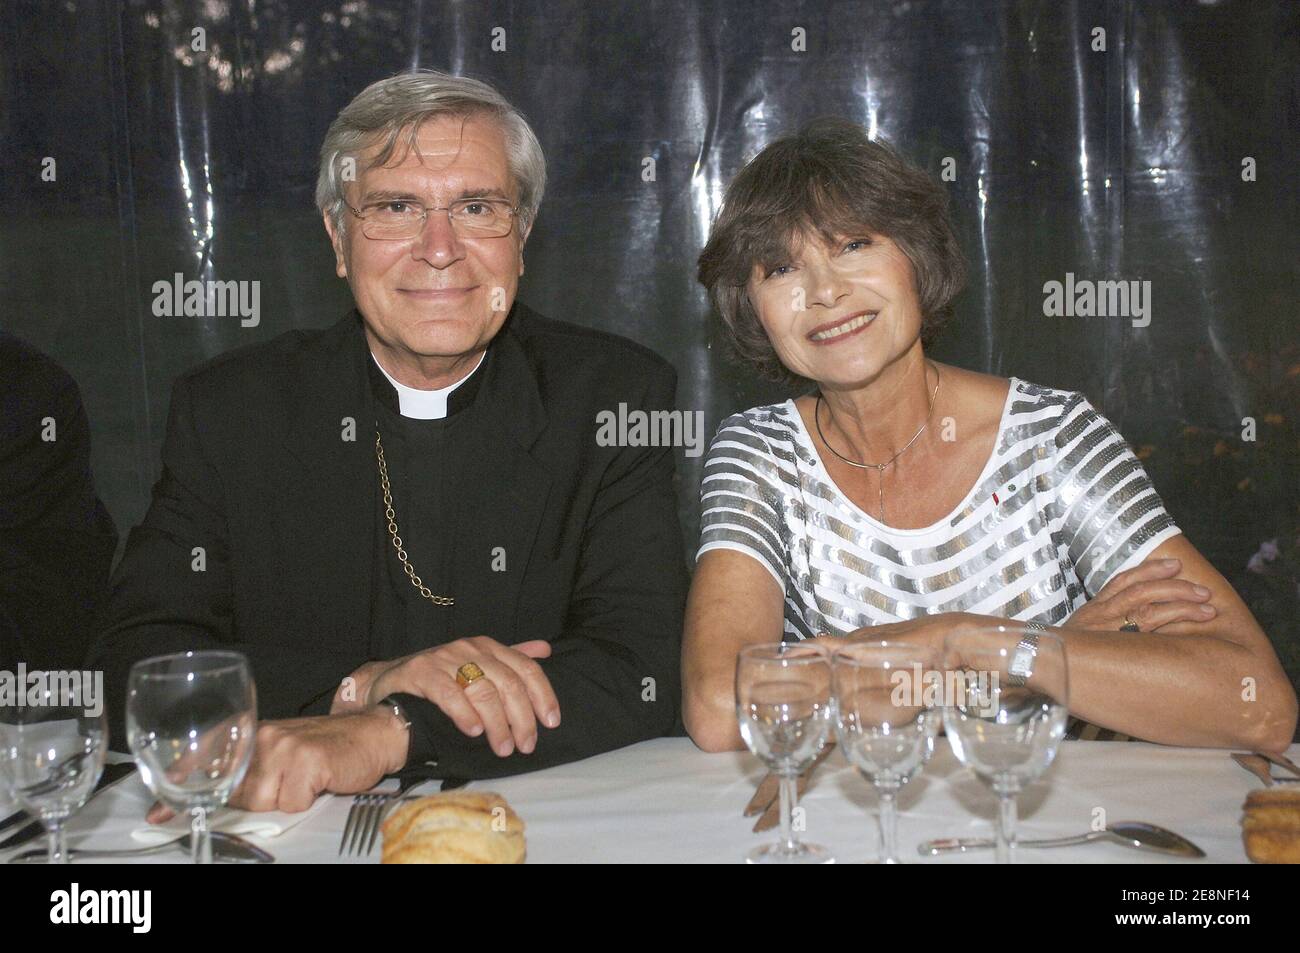 Archbishop Jean-Michel Di Falco and Macha Meril at the 12th 'Foret Des  Livres' to sign their new book in Chanceaux-Pres-Loches, France on August  26, 2007. Photo by Giancarlo Gorassini/ABACAPRESS.COM Stock Photo -